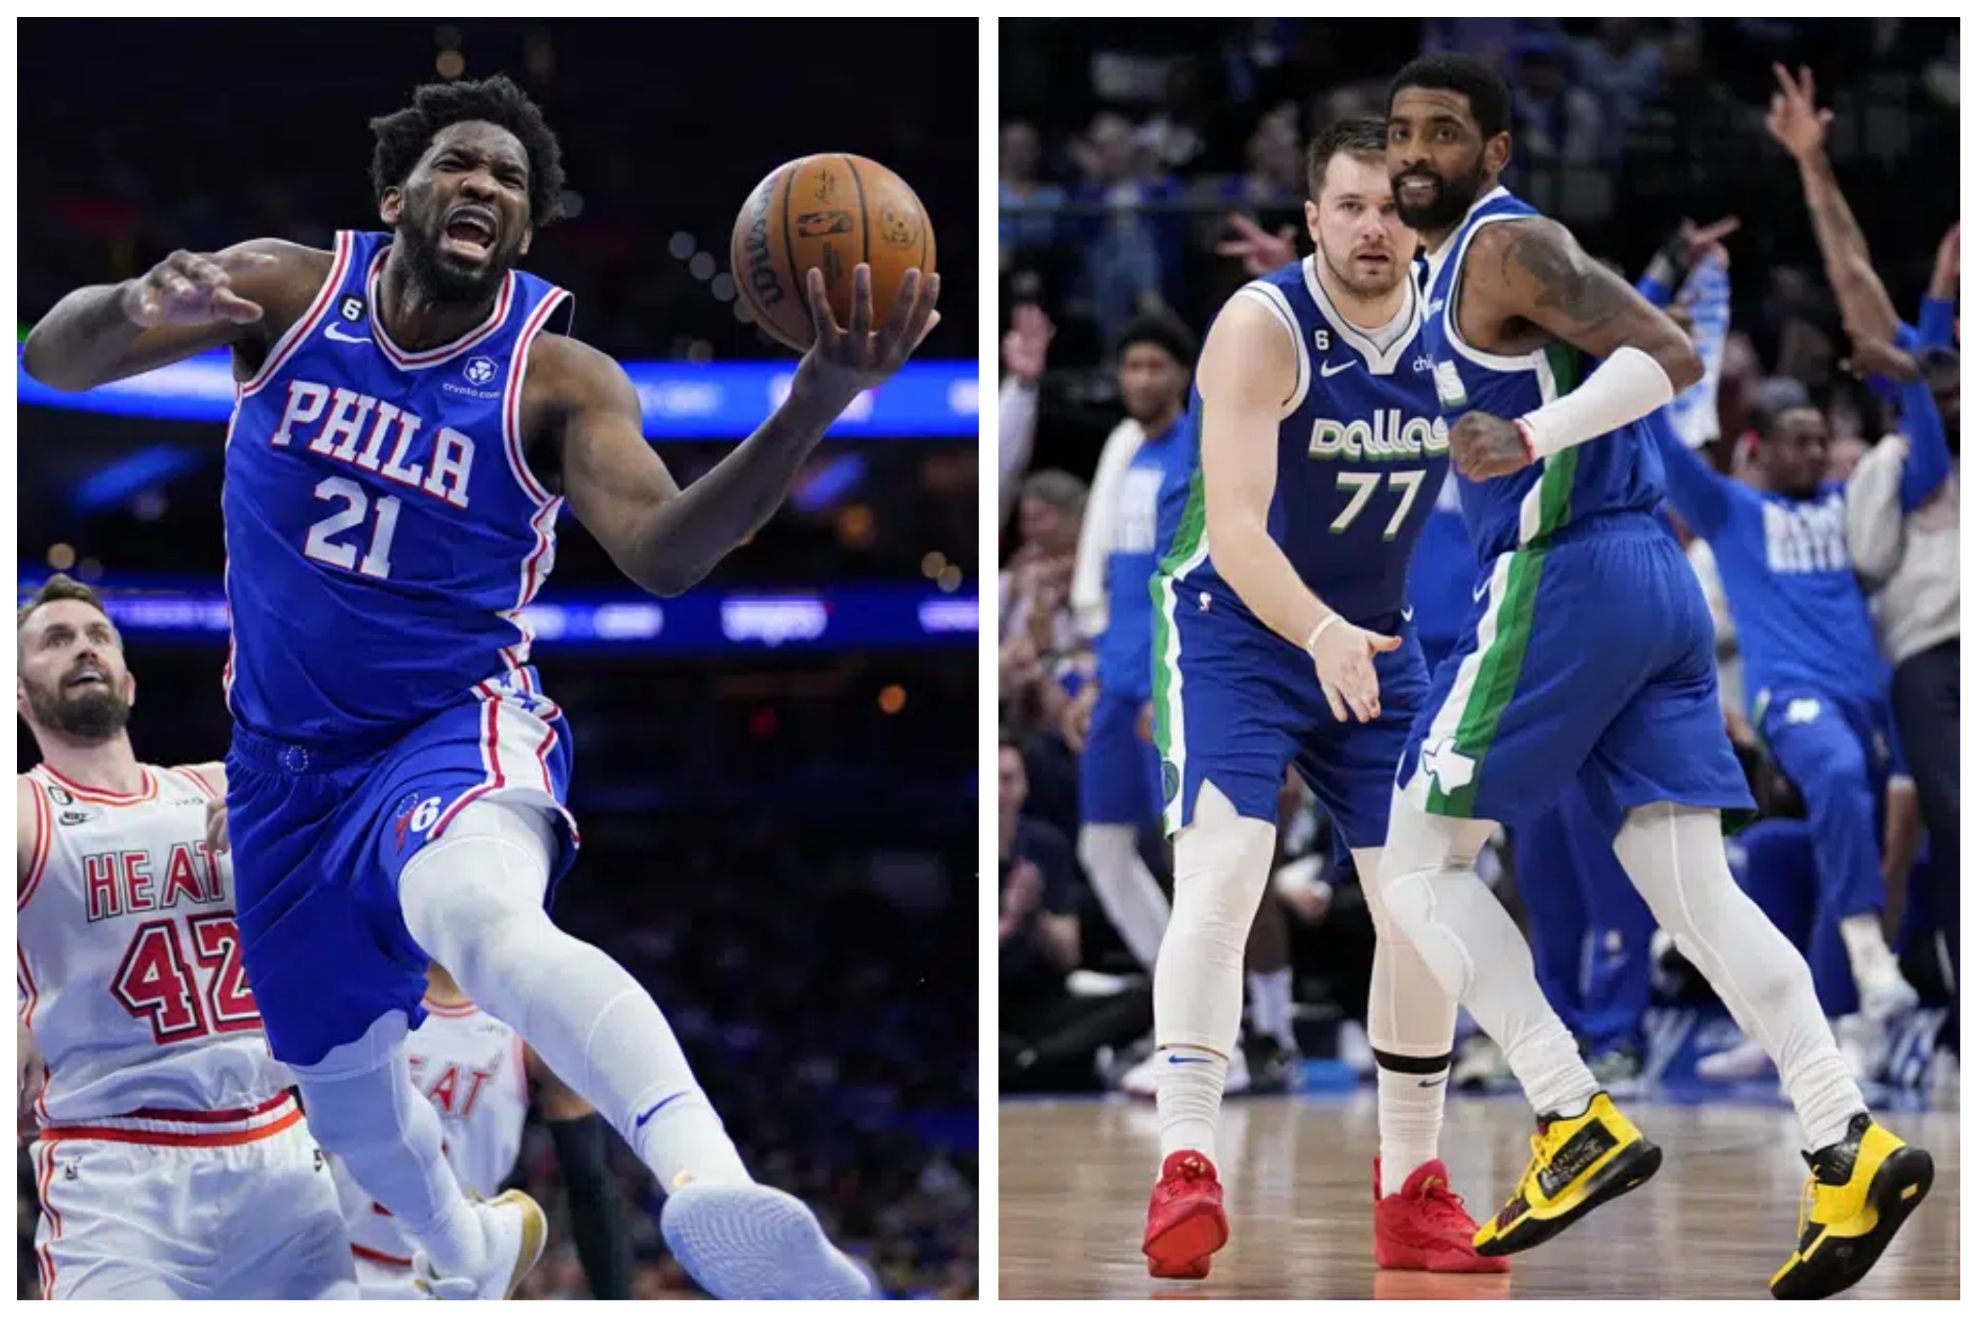 The Philadelphia 76ers will visit Dallas to play at the American Airlines Center.